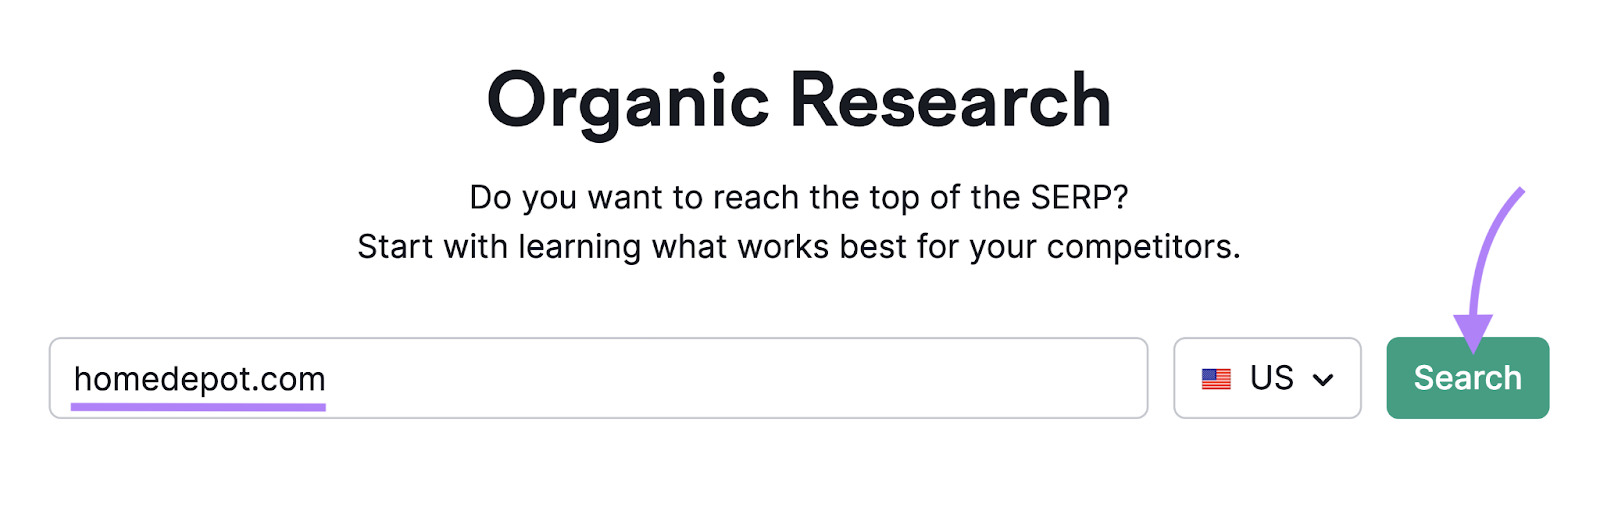 "homedepot.com" entered into Organic Research tool search bar